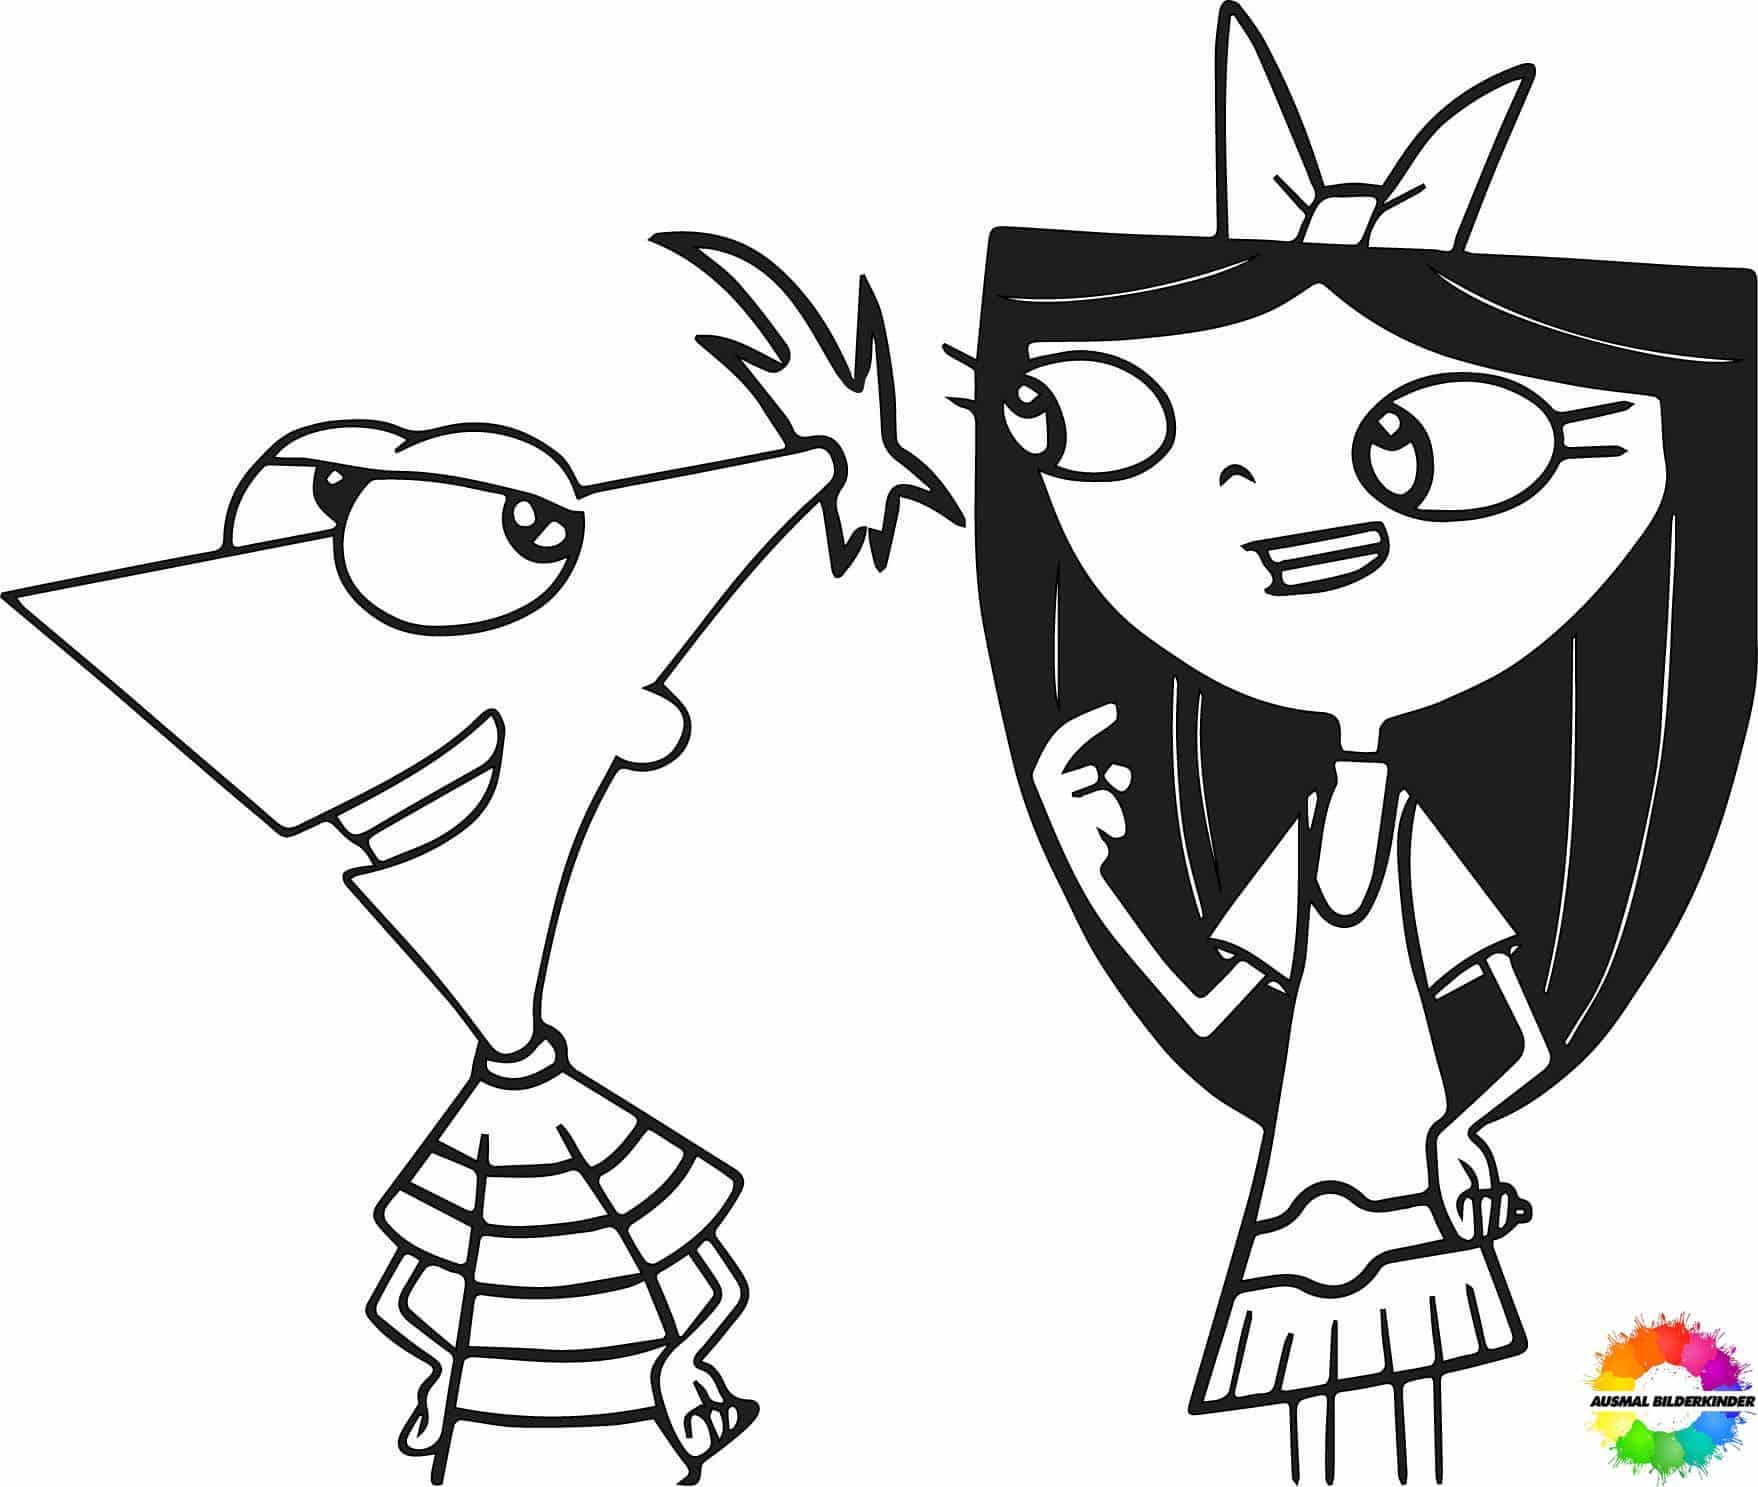 Phineas , Ferb 6